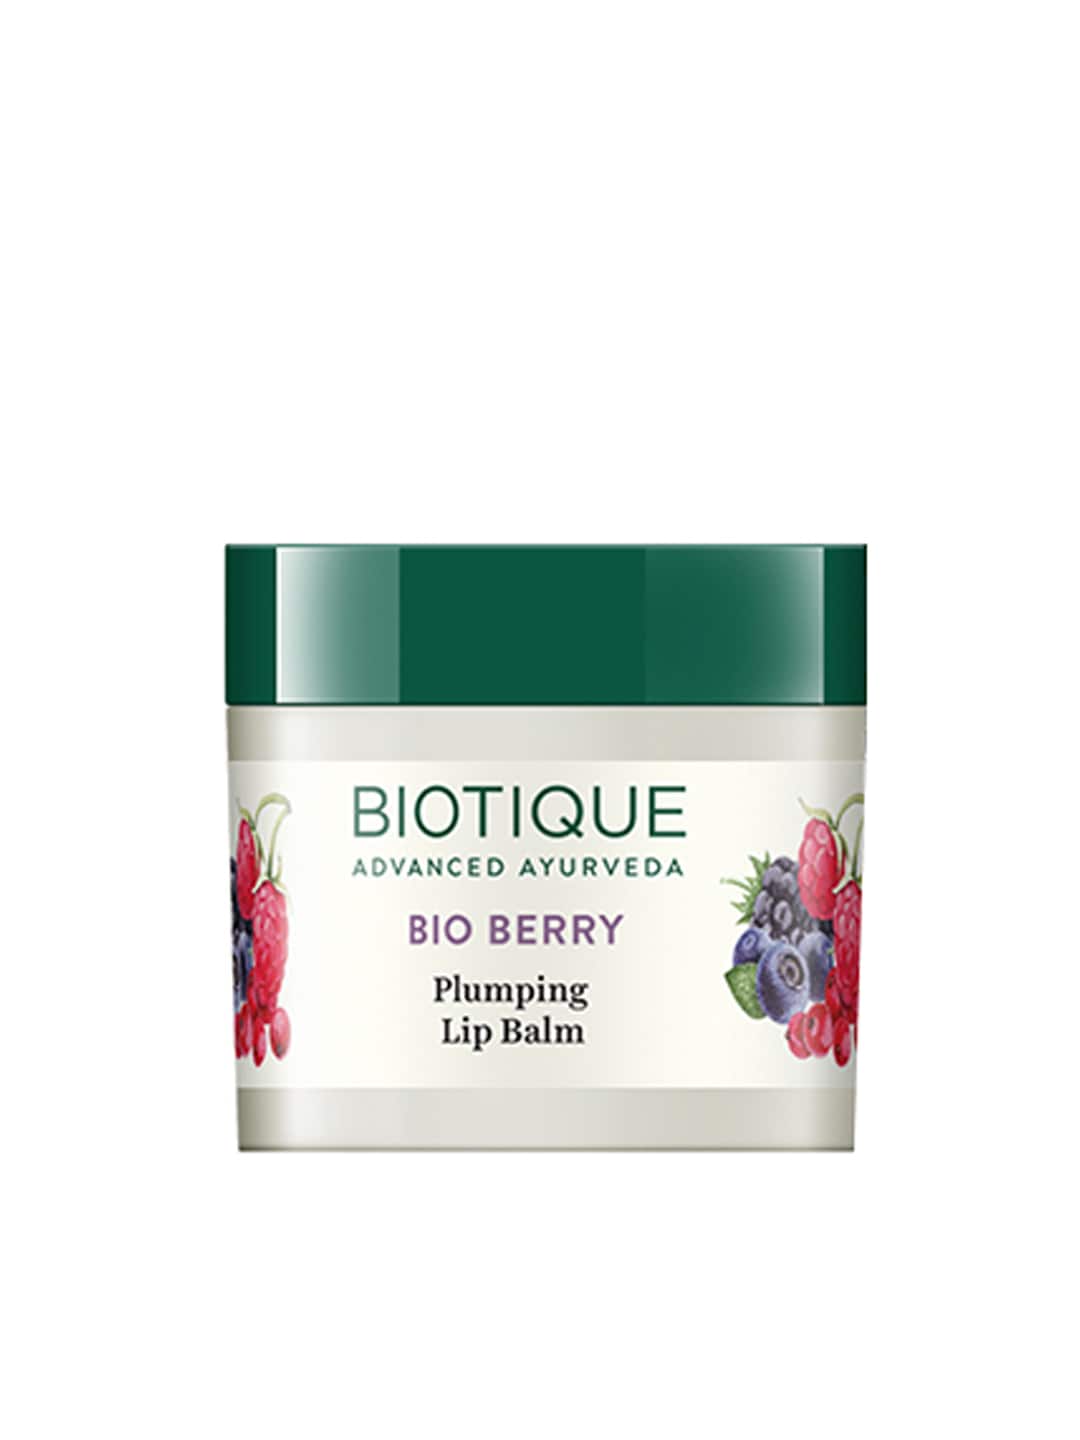 Biotique Bio Berry Plumping Smoothes & Swells Lip Balm 12g Price in India